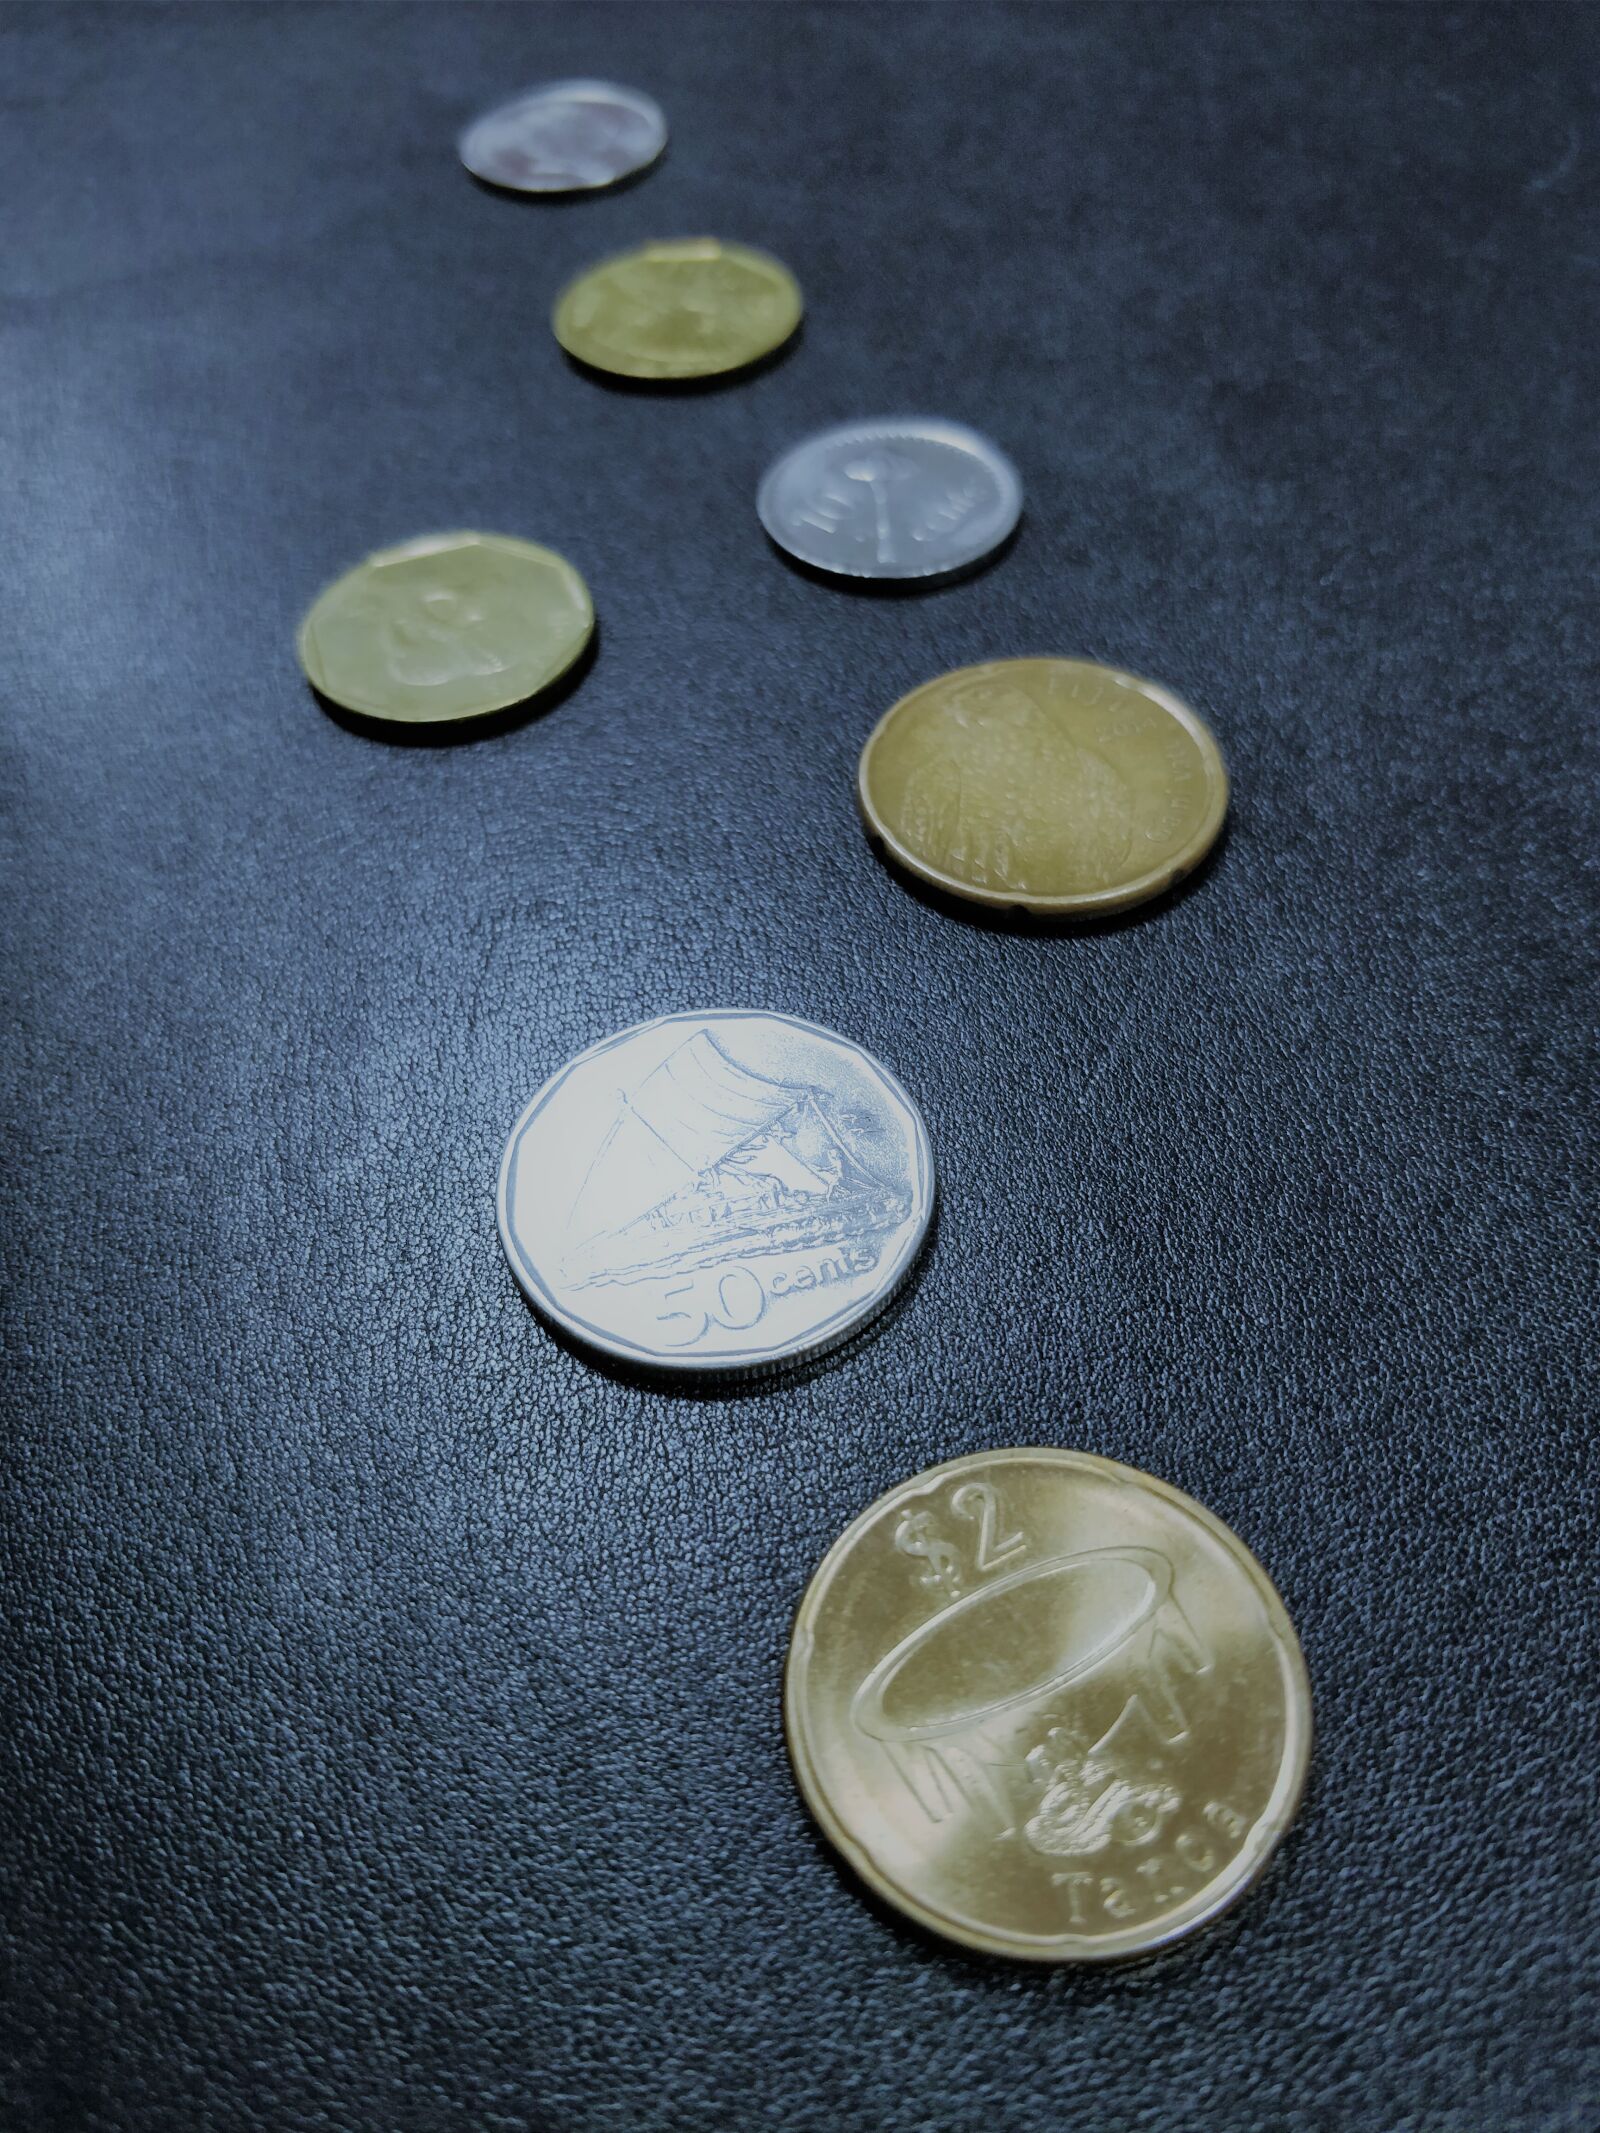 OnePlus 5 sample photo. Coins photography